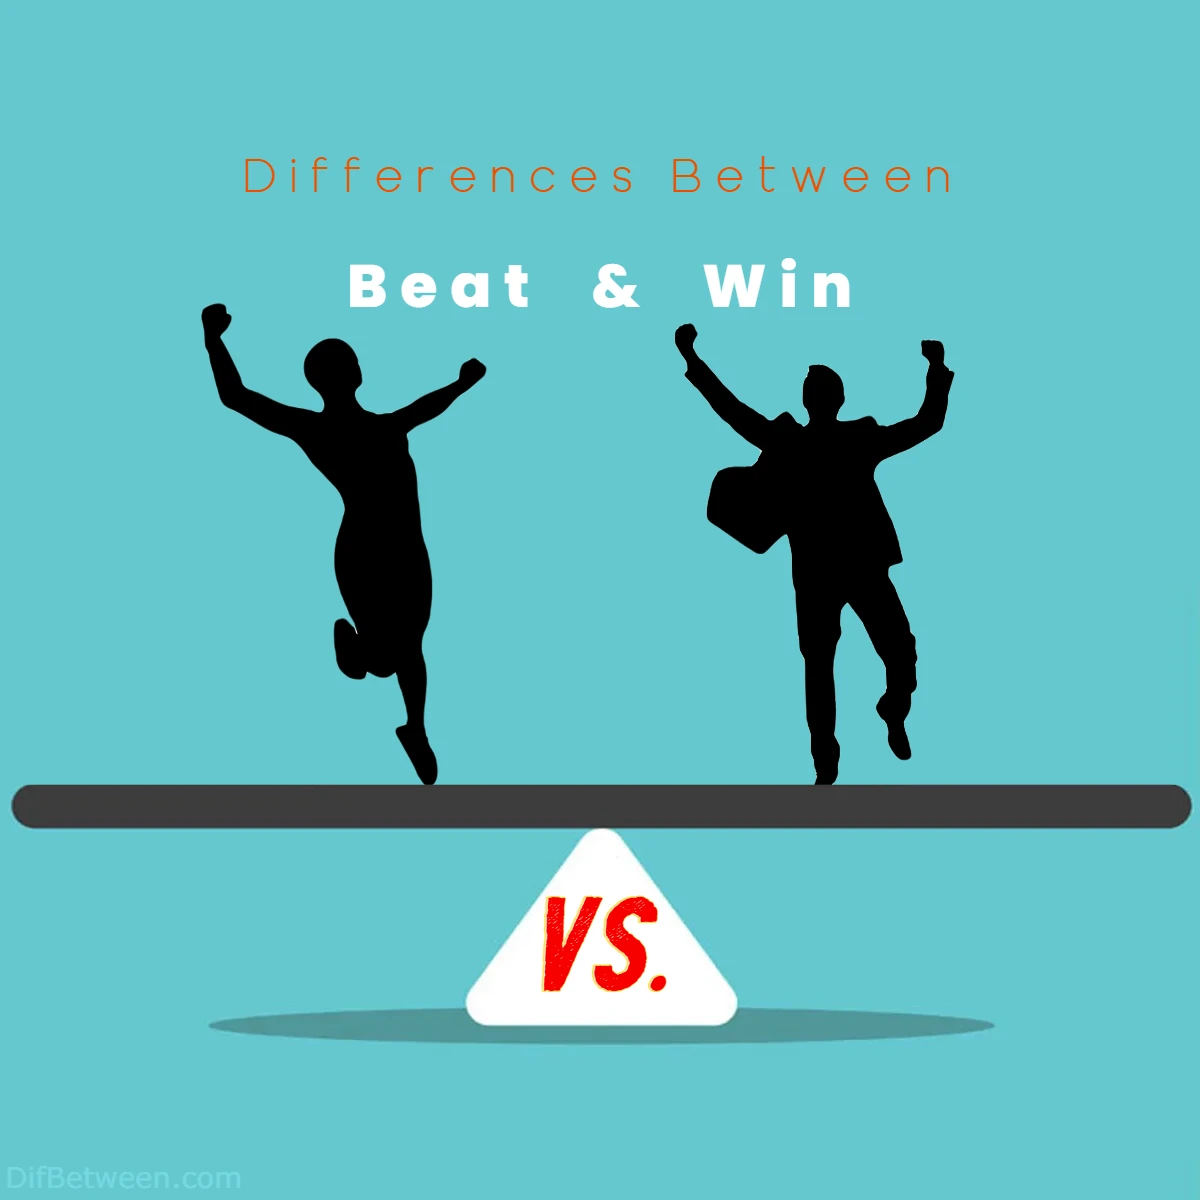 Differences Between Beat vs Win